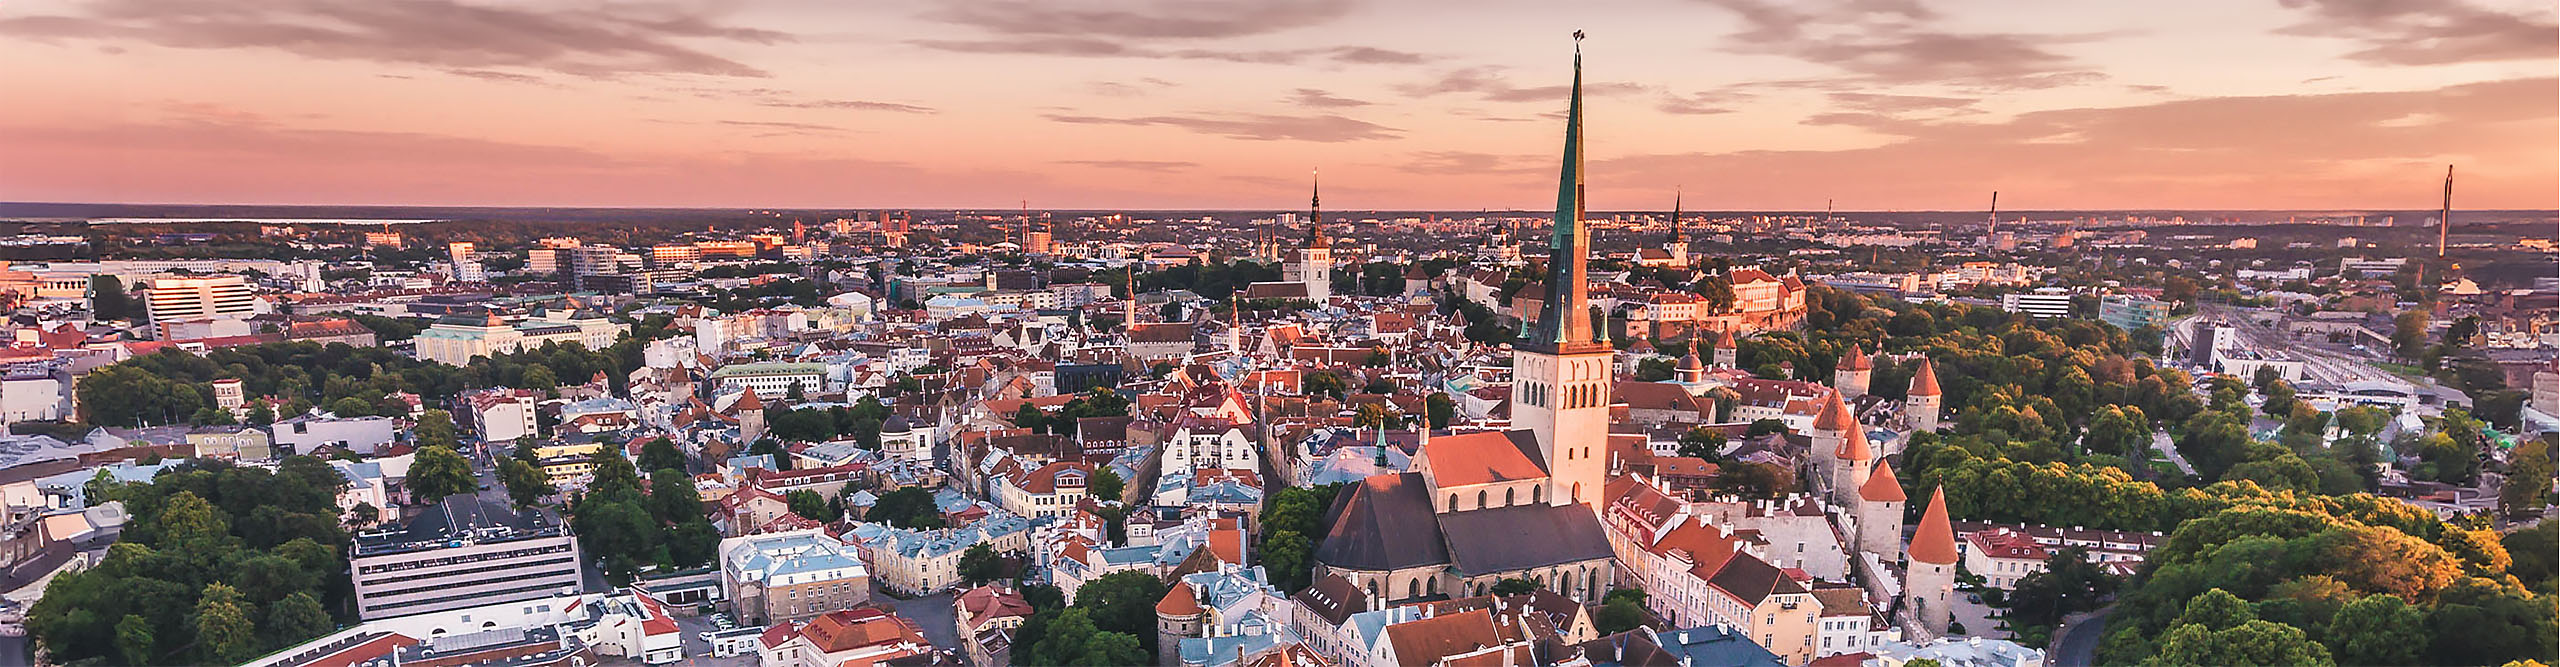 Aerial view of old town of Tallinn, Estonia, at sunset with a pink sky 